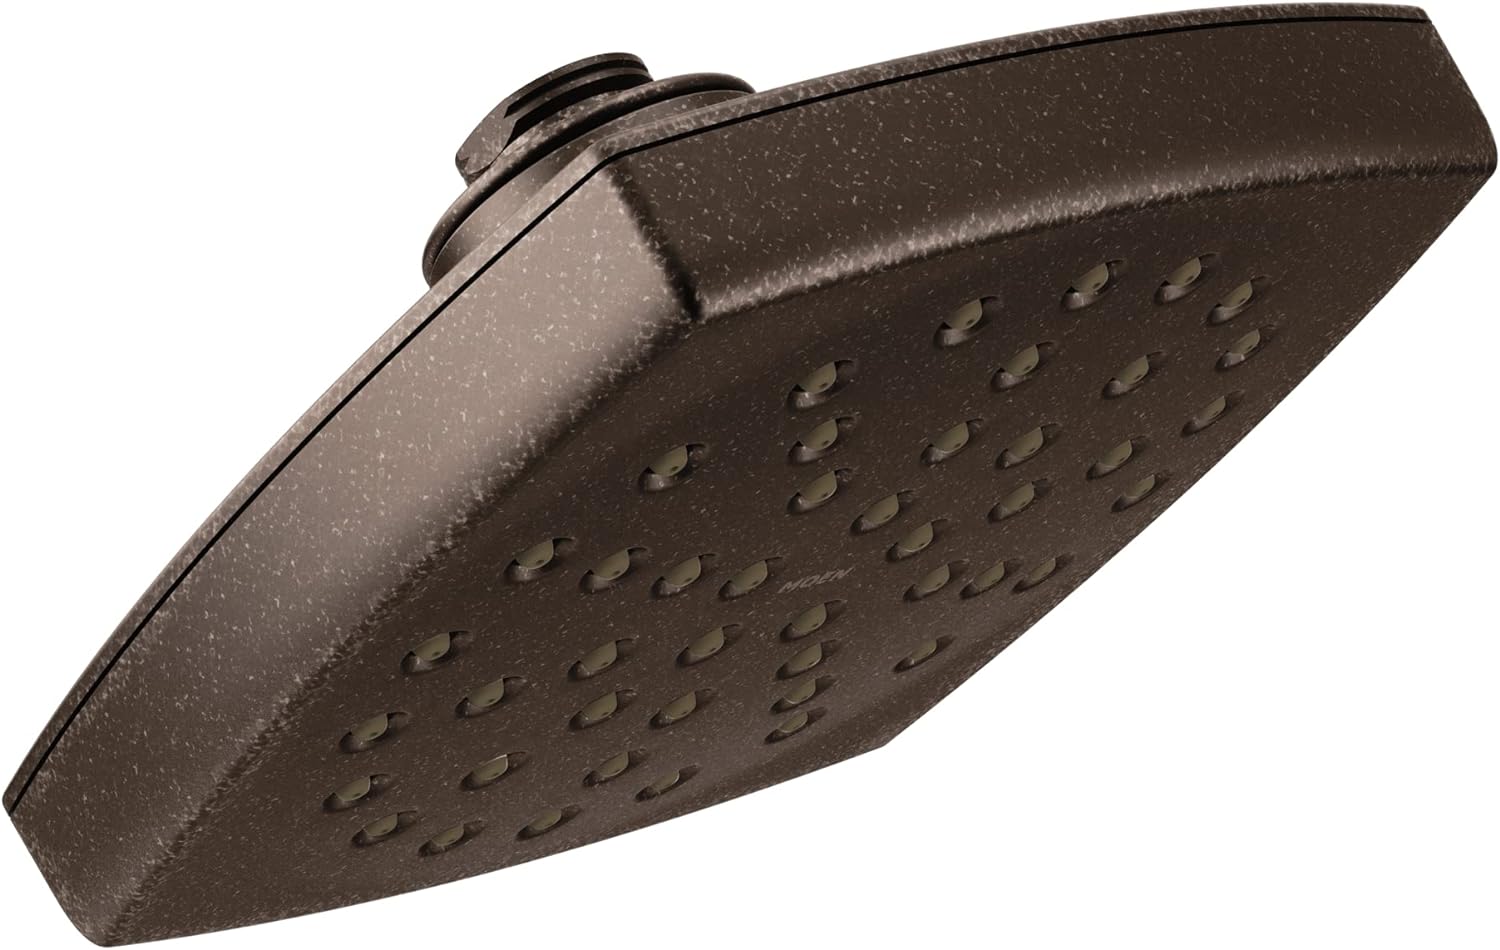 Moen Voss Oil Rubbed Bronze 6-Inch Single-Function Rainshower Showerhead with Immersion Technology, S6365ORB